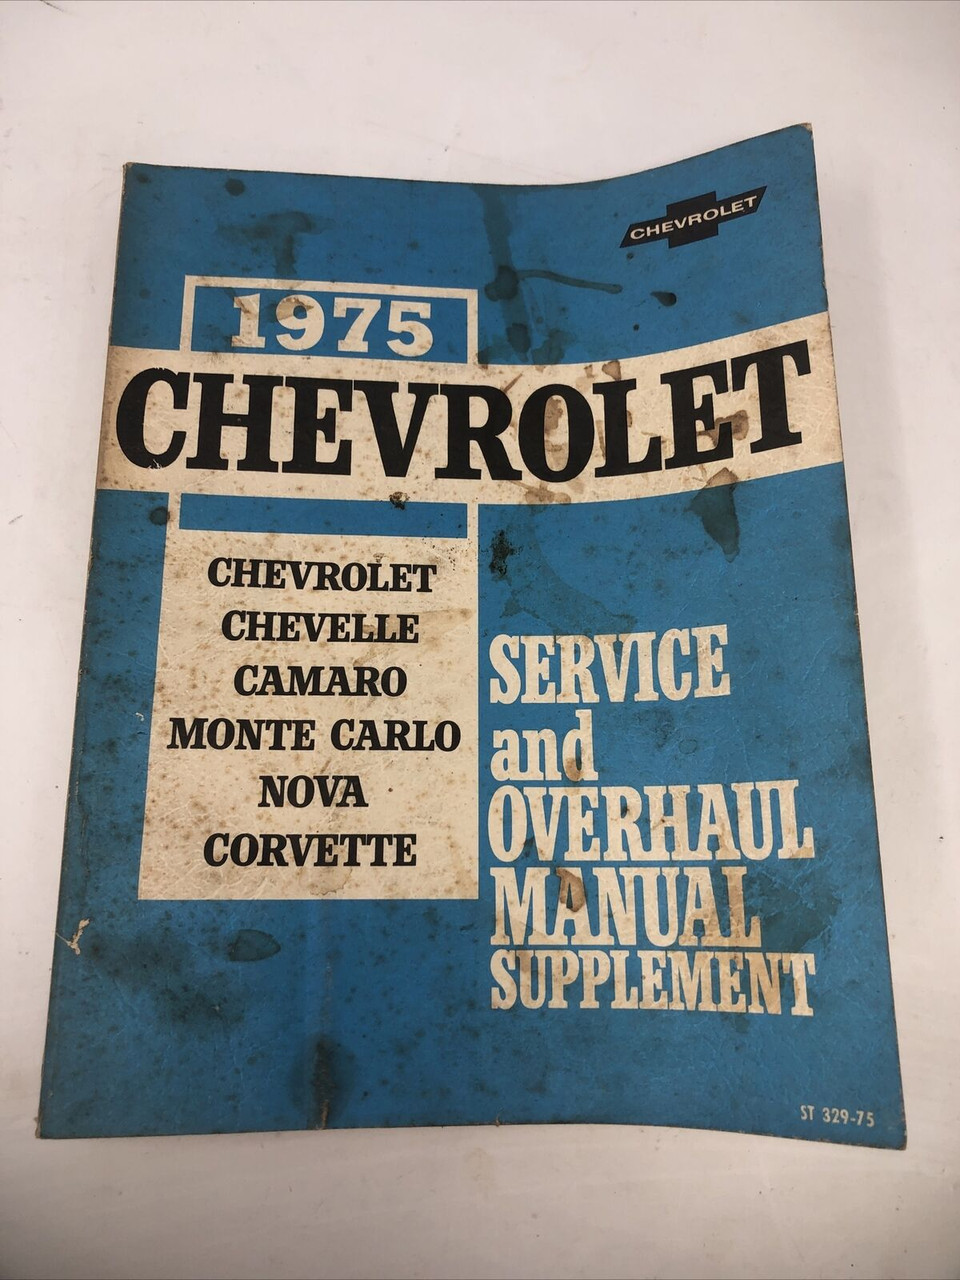 CHEVROLET SERVICE AND OVERHAUL MANUAL SUPPLEMENT 1975 ST329-75 - PREOWNED